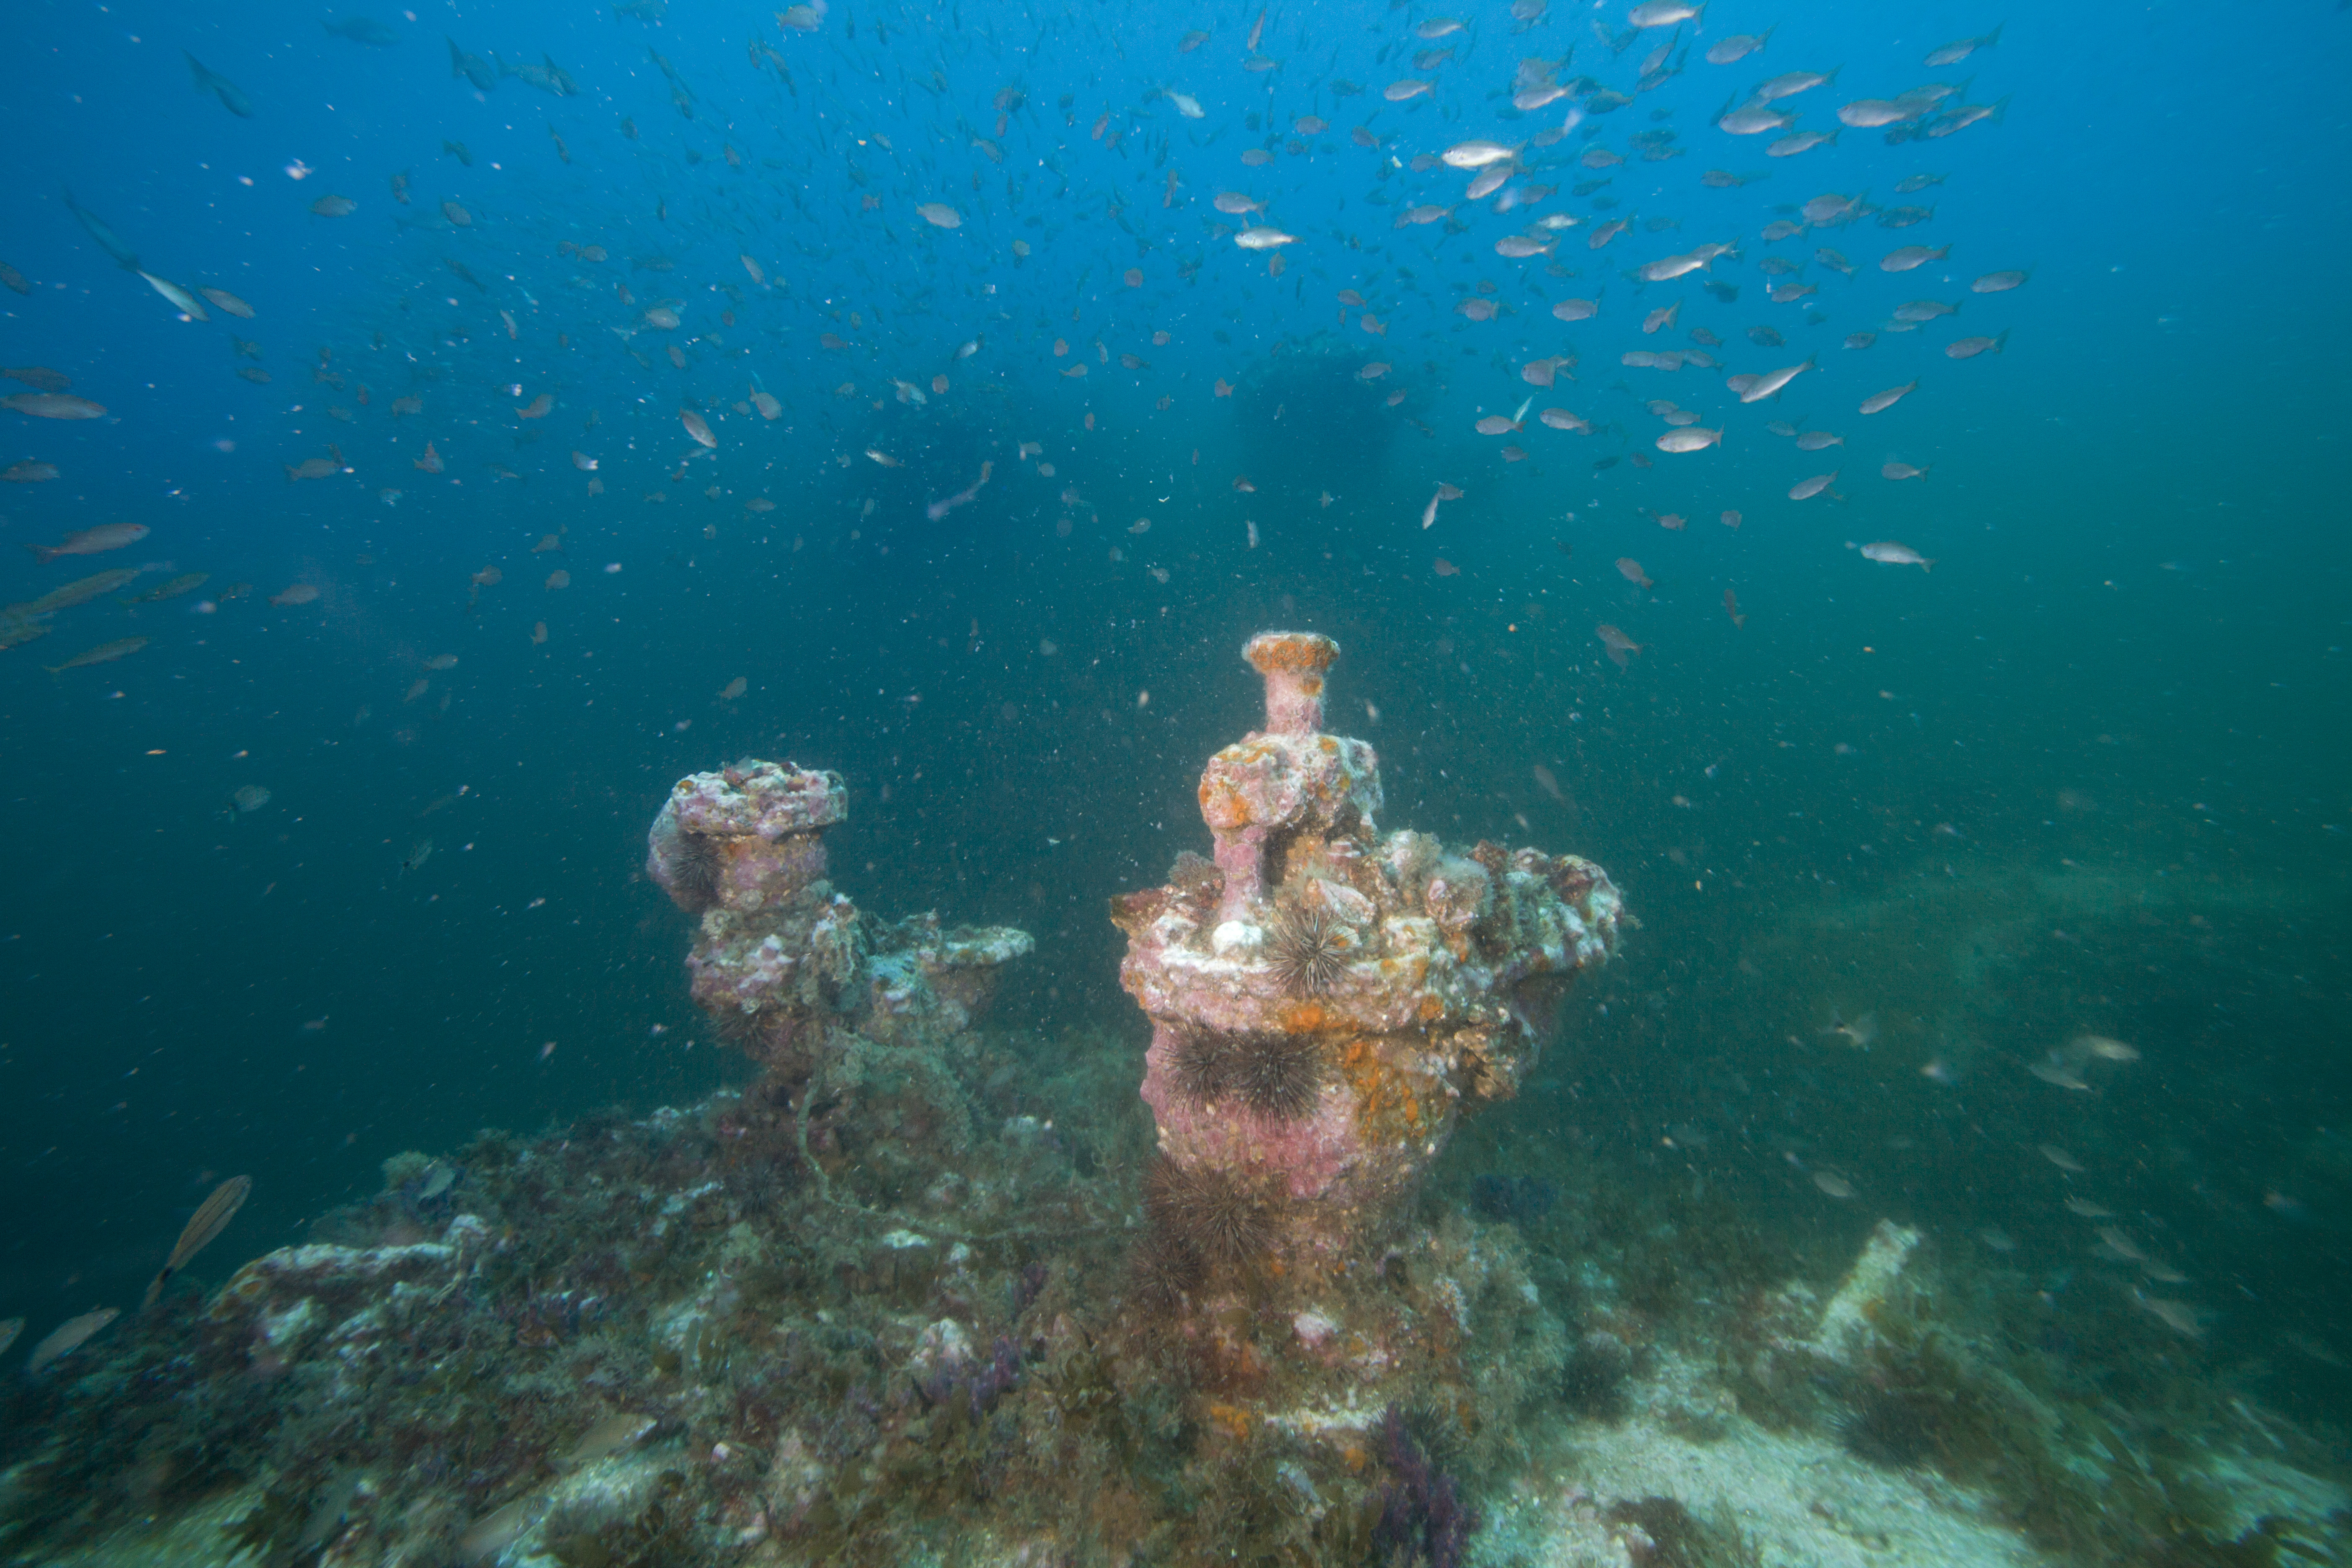 Marine life now encrusts the valves on top of Dixie Arrow’s boilers. (Photo credit: Greg McFall/NOAA)